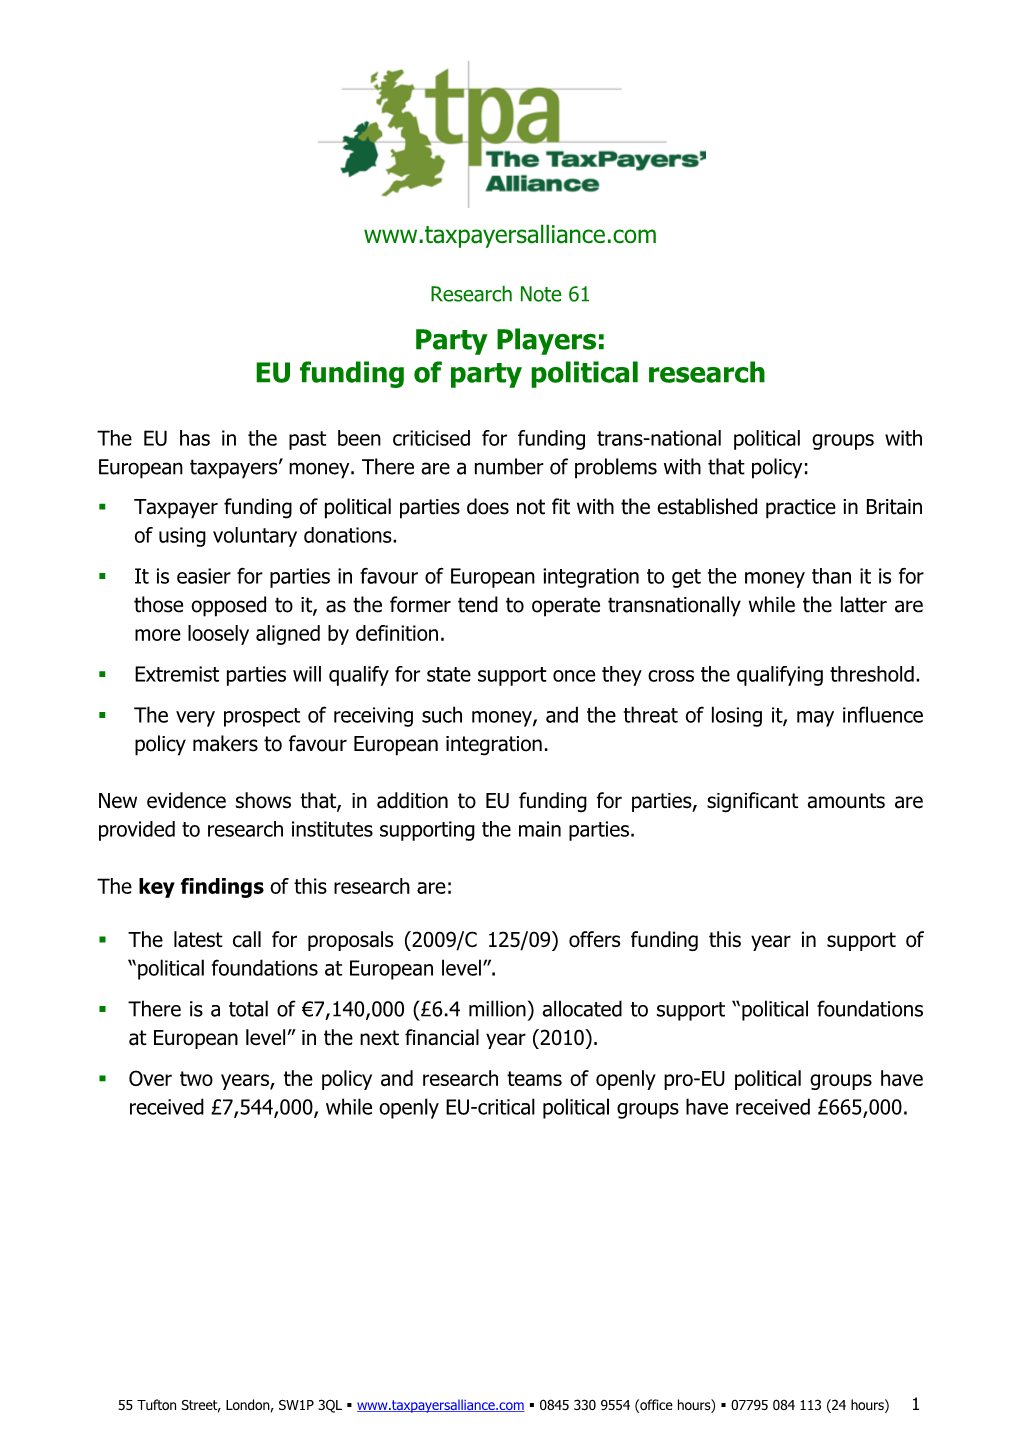 EU Funding of Party Political Research